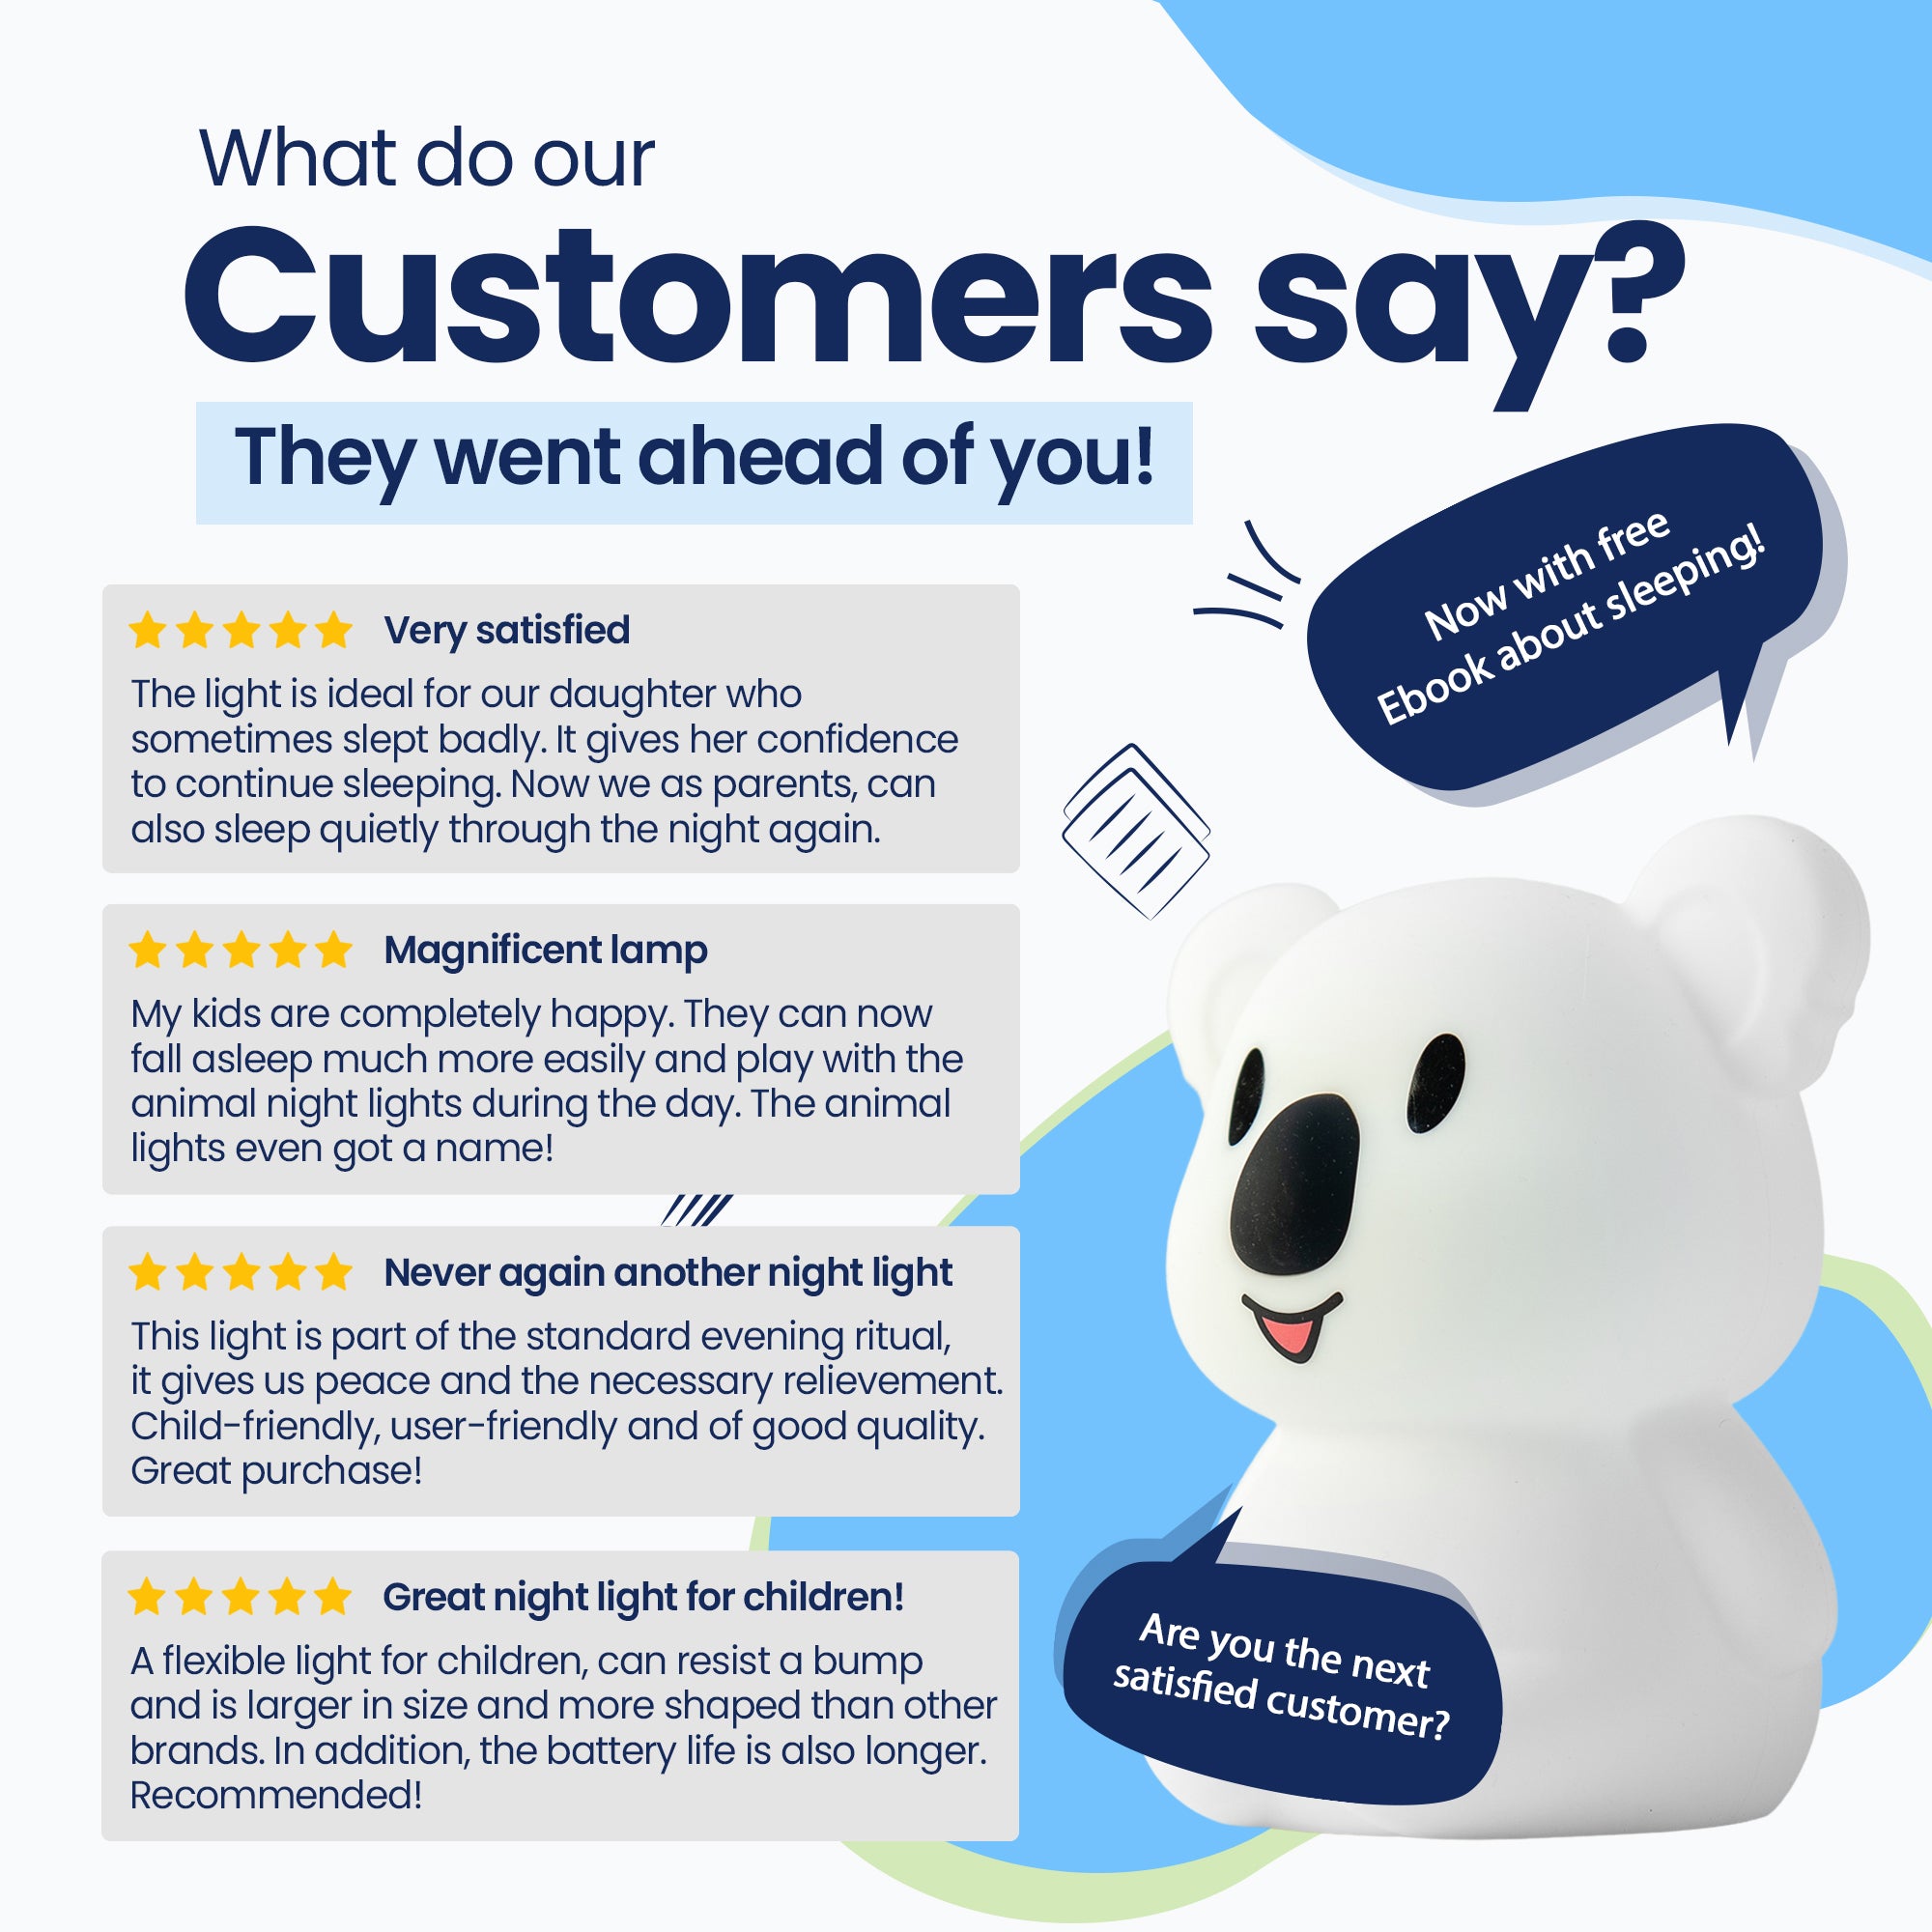 What do our customers say? - They went before you! - Very satisfied - Beautiful lamp - Never again - Super lamp for children! - Now with free E-book about sleeping! - Are you the next satisfied customer?